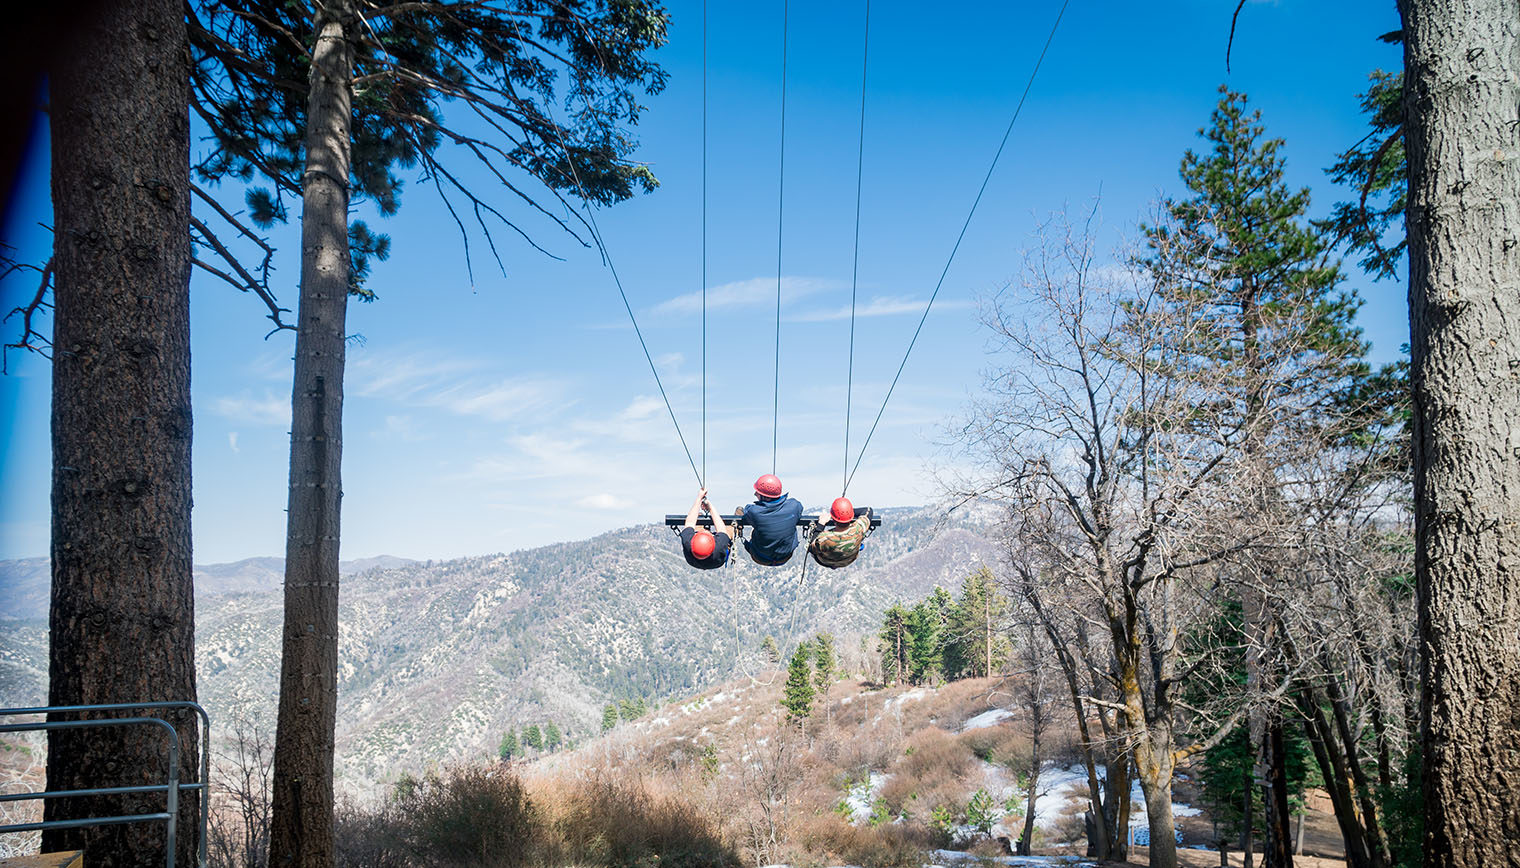 A triple swing overlooking a view of mountains.